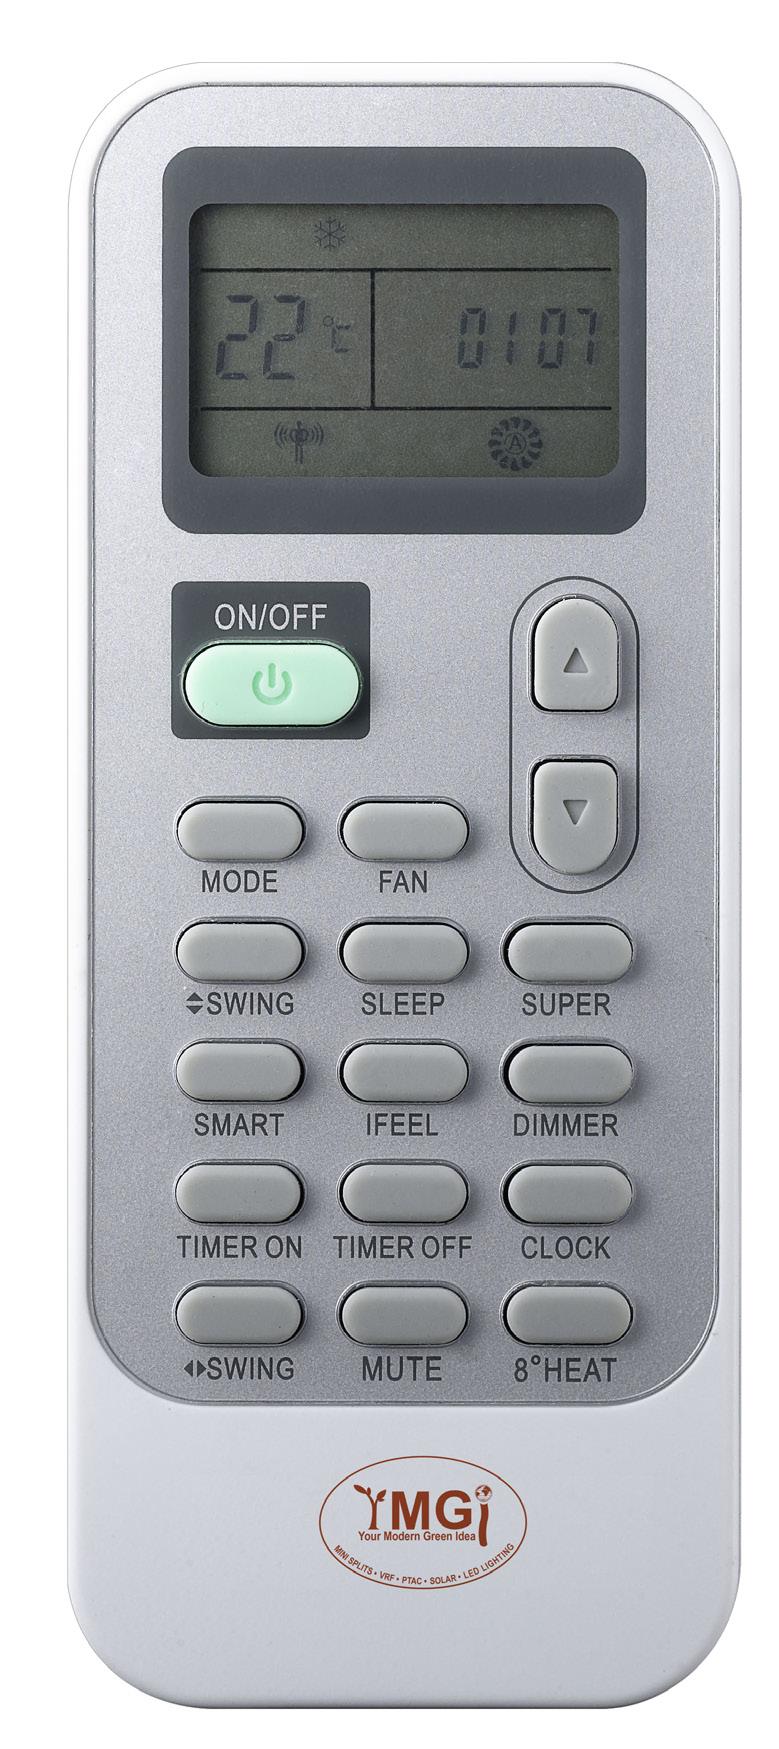 Remote Control Features & Functions (78) Symphony Solo Series Remote Control USERS GUIDE